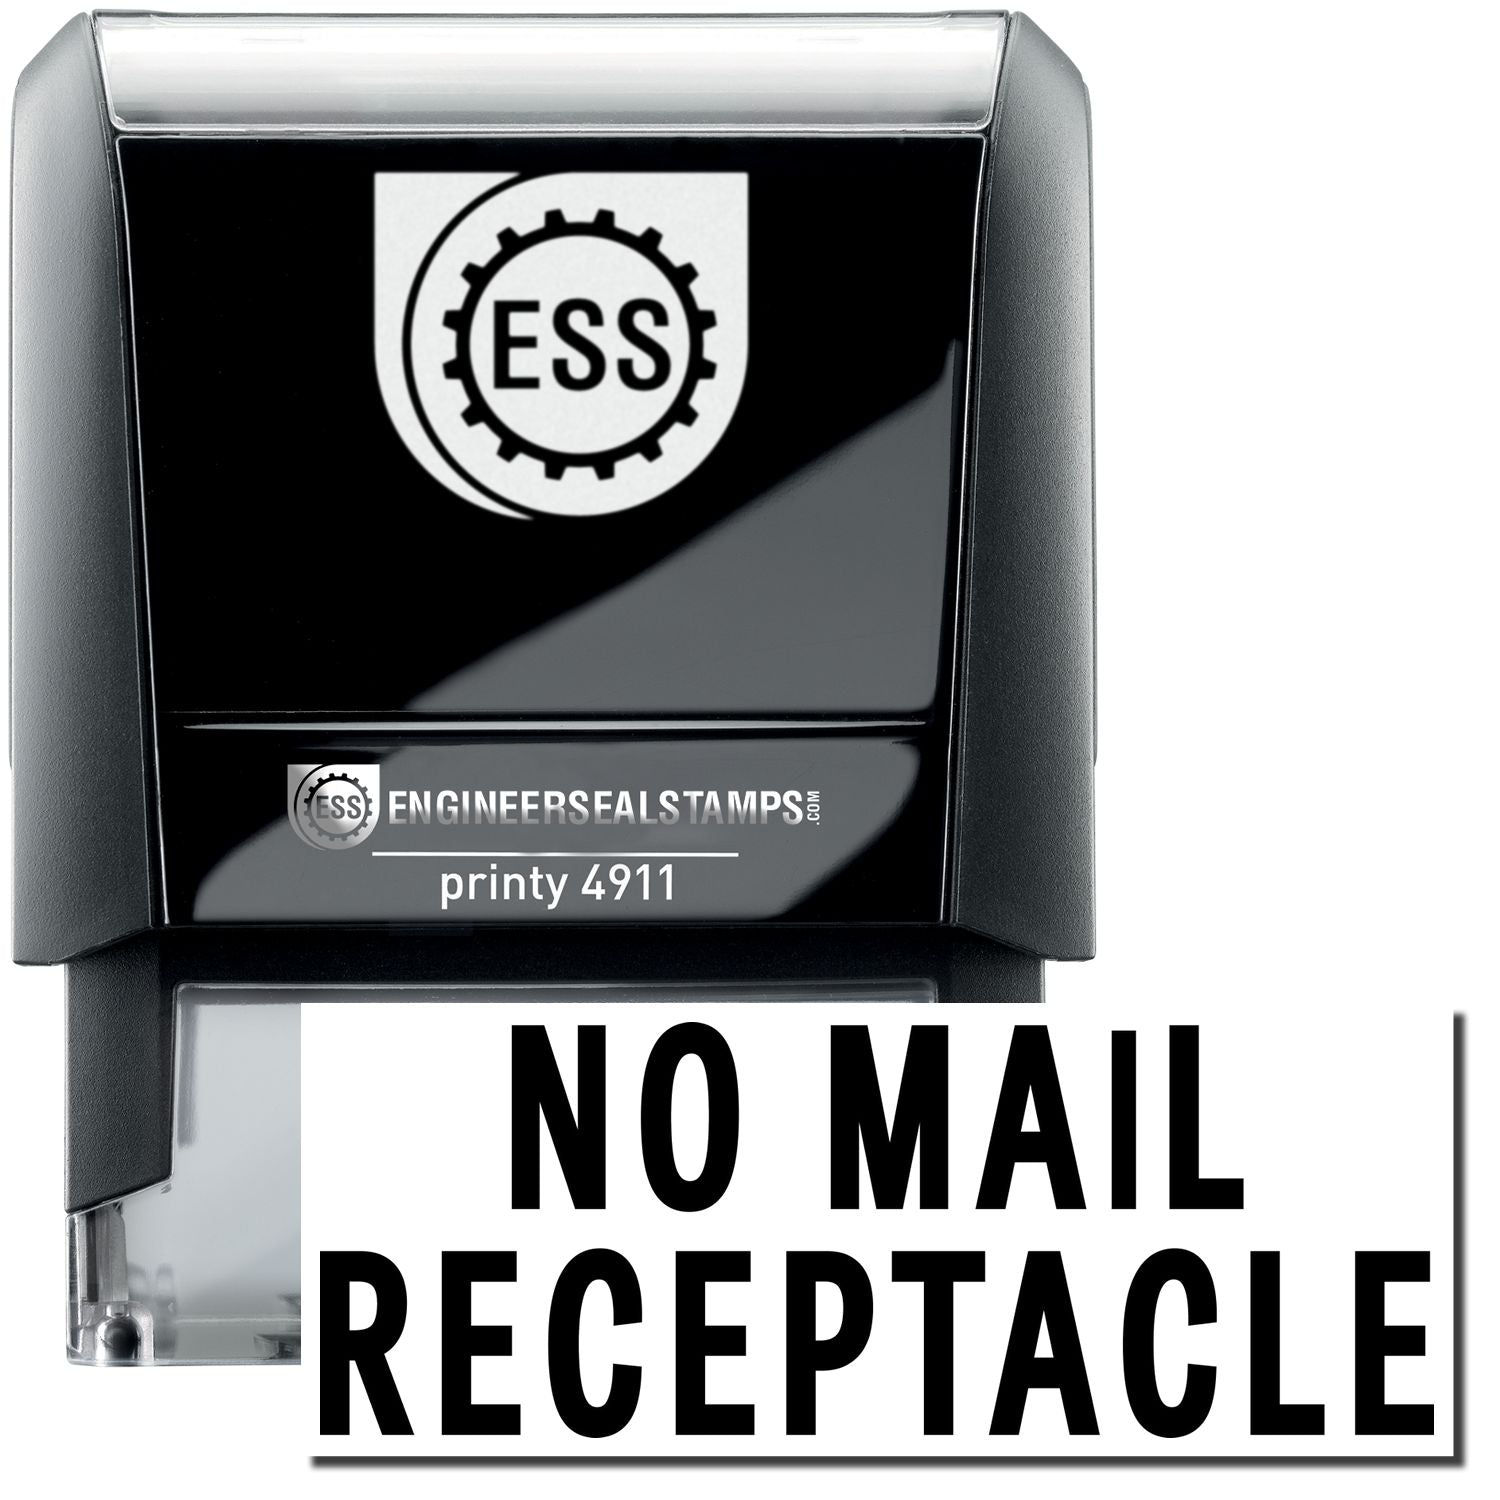 A self-inking stamp with a stamped image showing how the text "NO MAIL RECEPTACLE" is displayed after stamping.